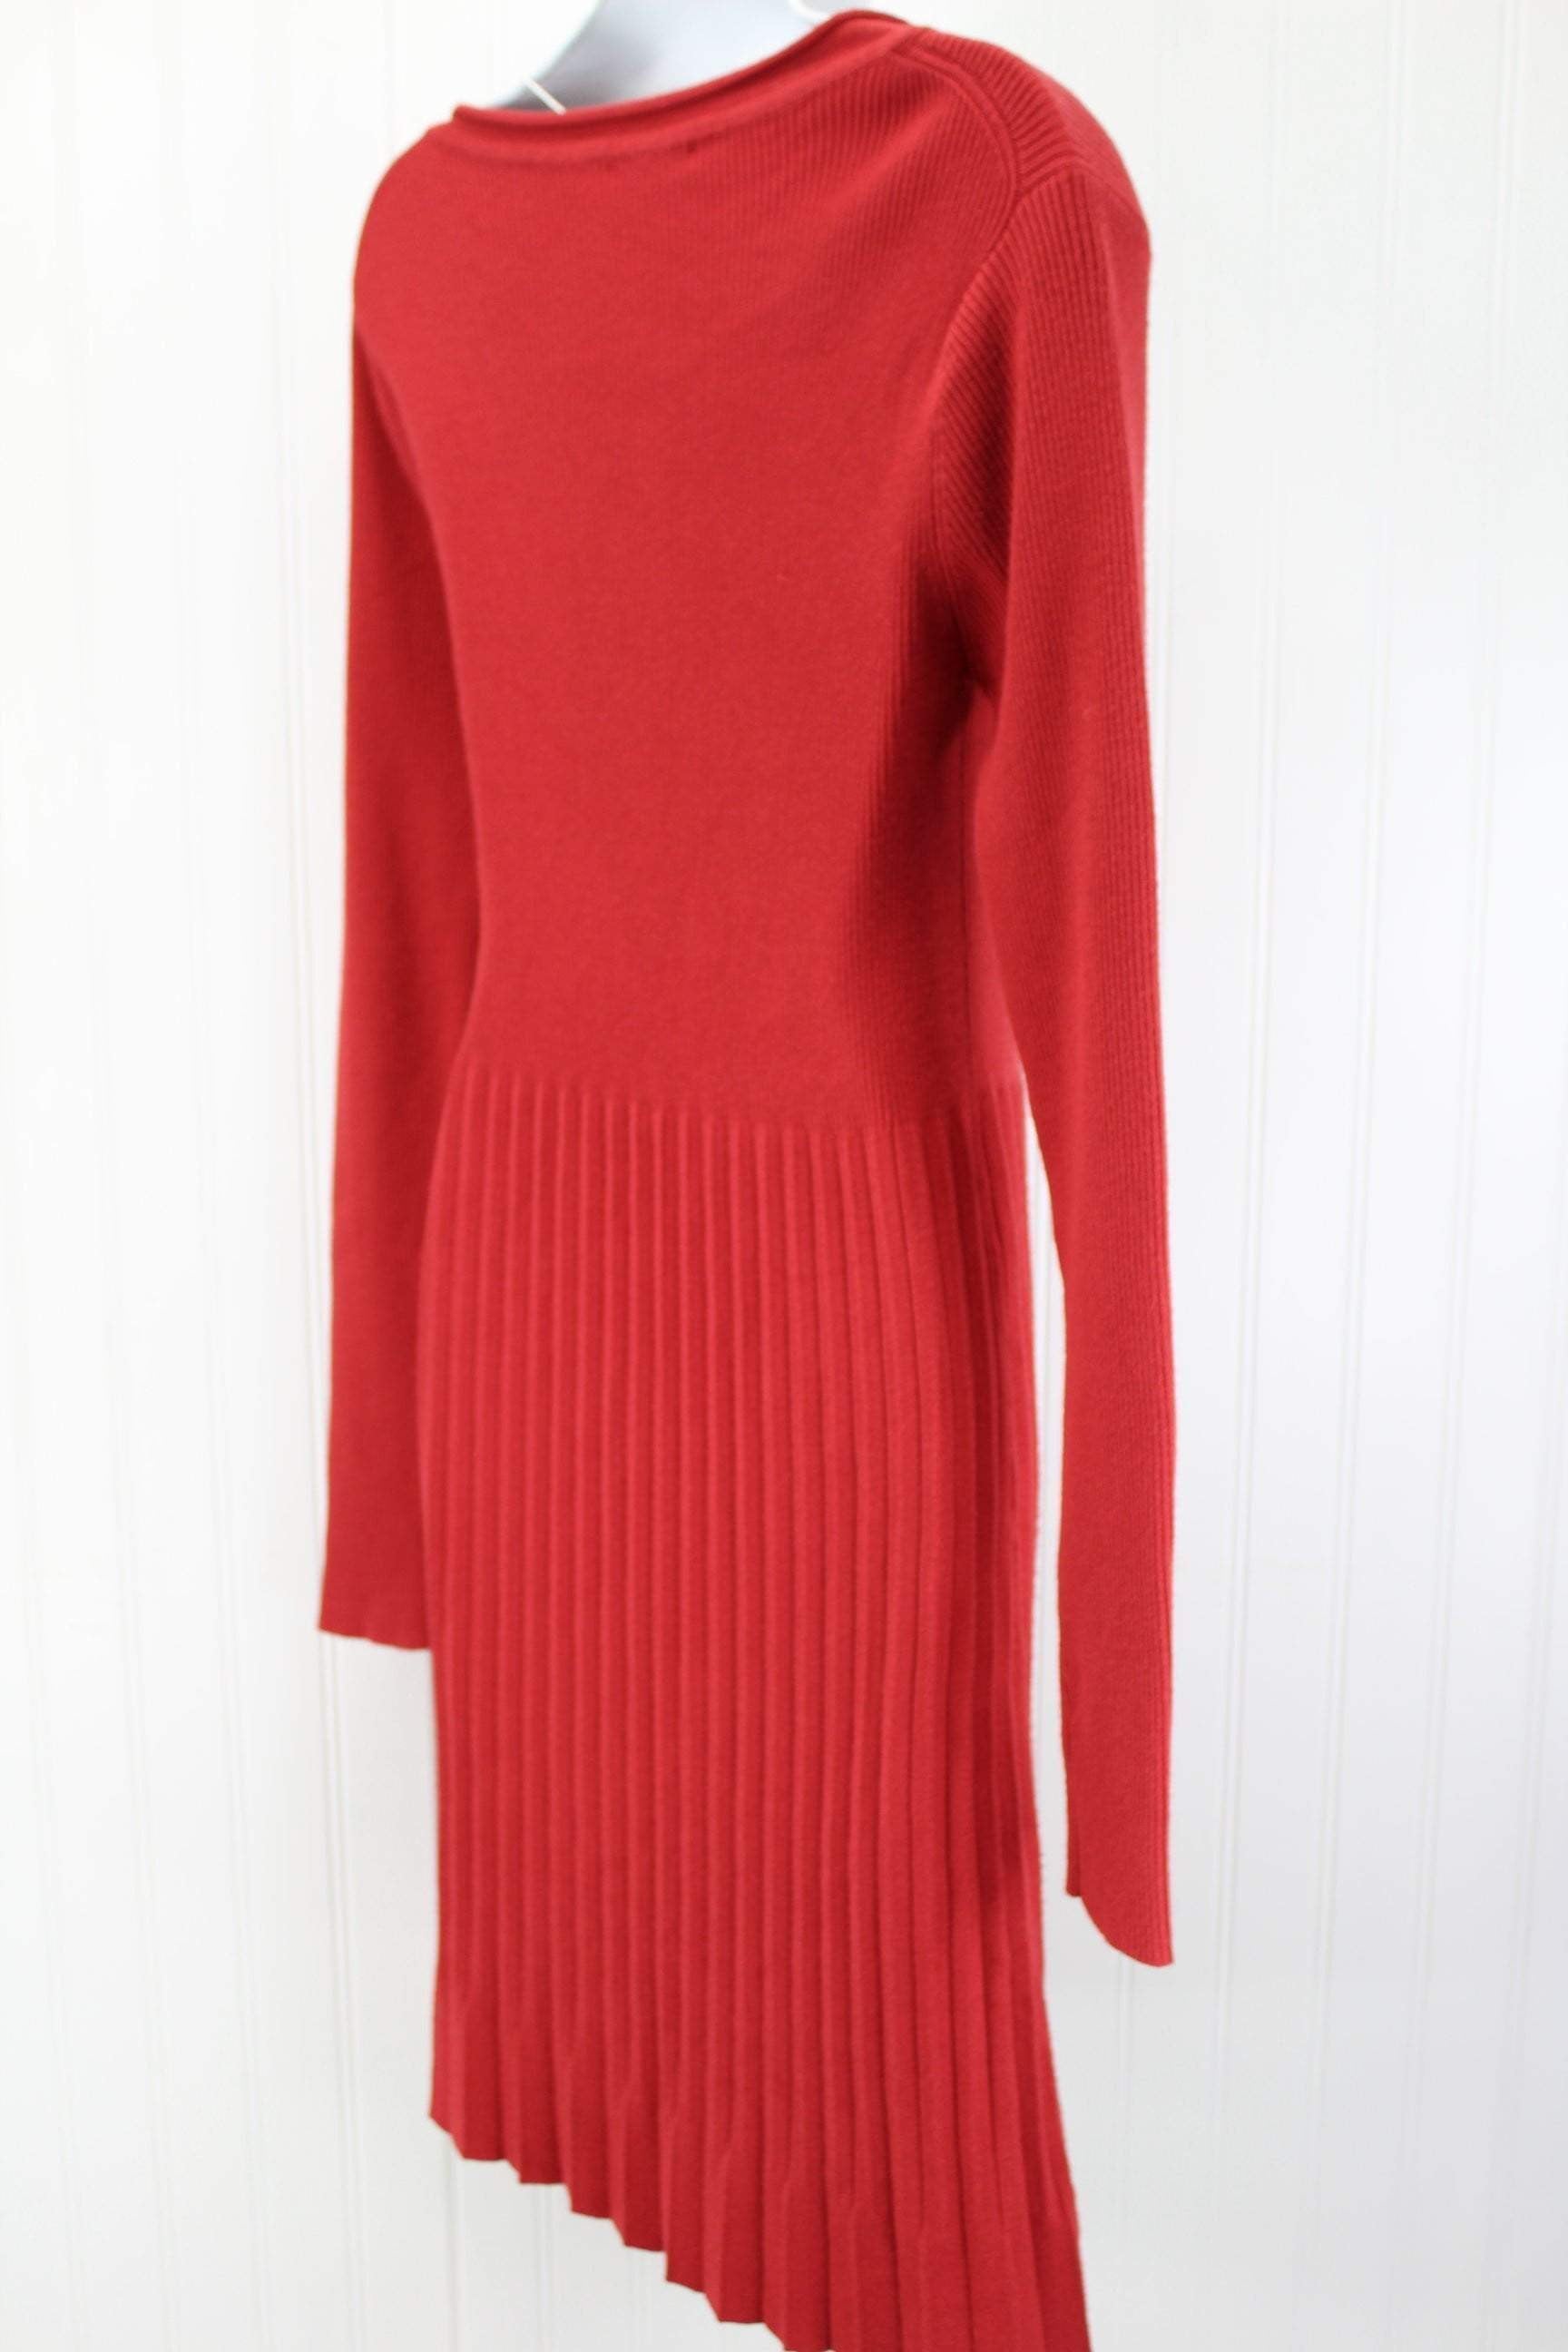 bip-bip Dress - Burnt Sienna Knit Scoop Neck Pleated Size M Zaragoza Spain rusty red color